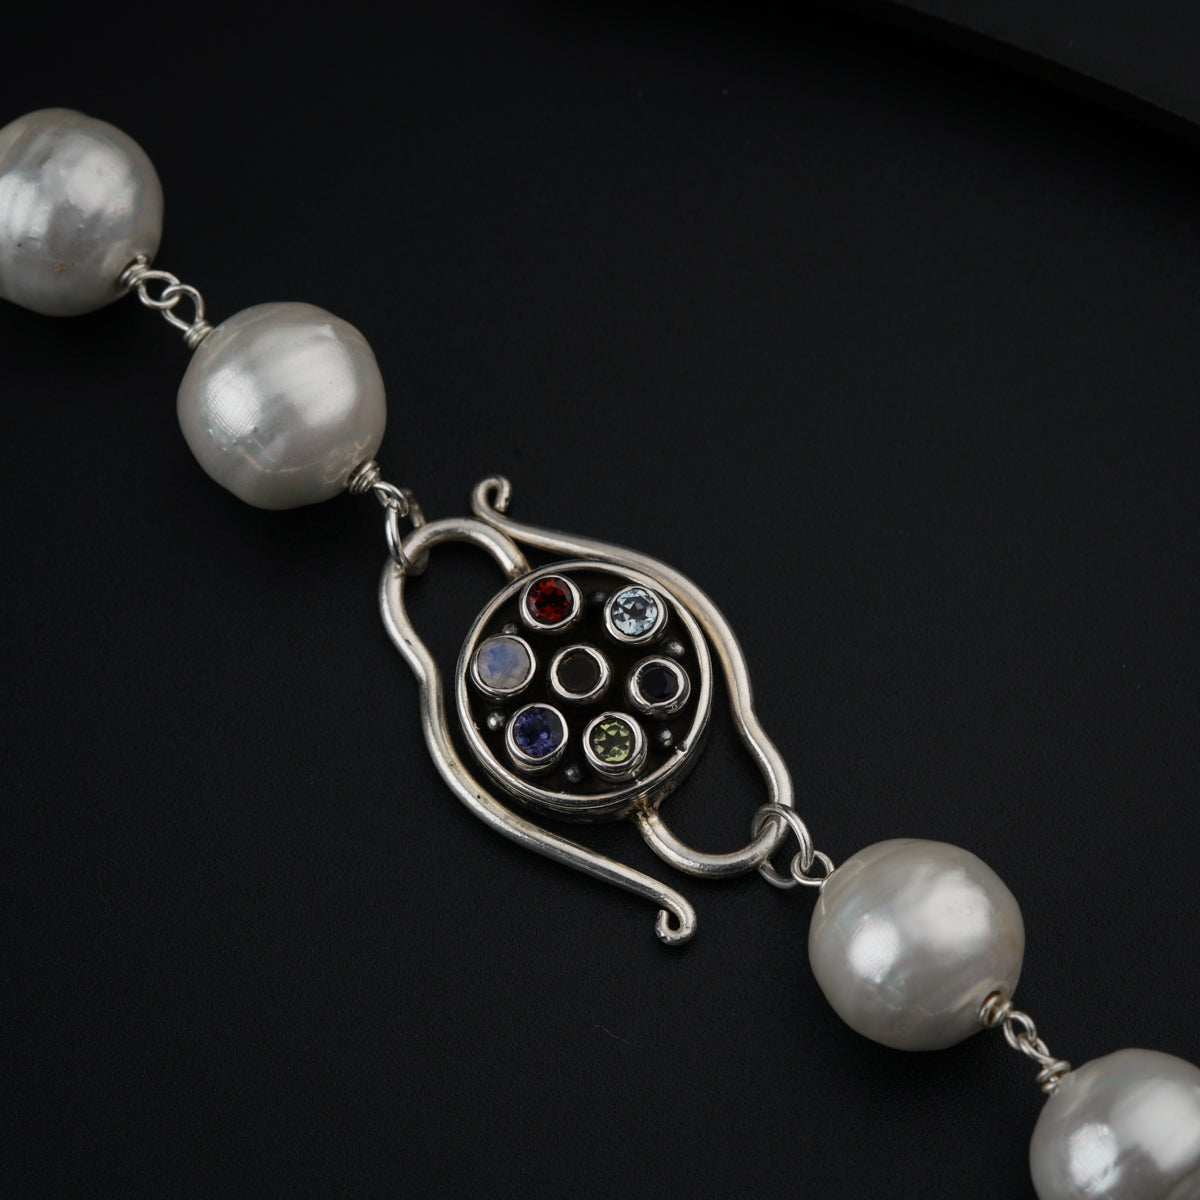 a silver bracelet with a bunch of pearls on it